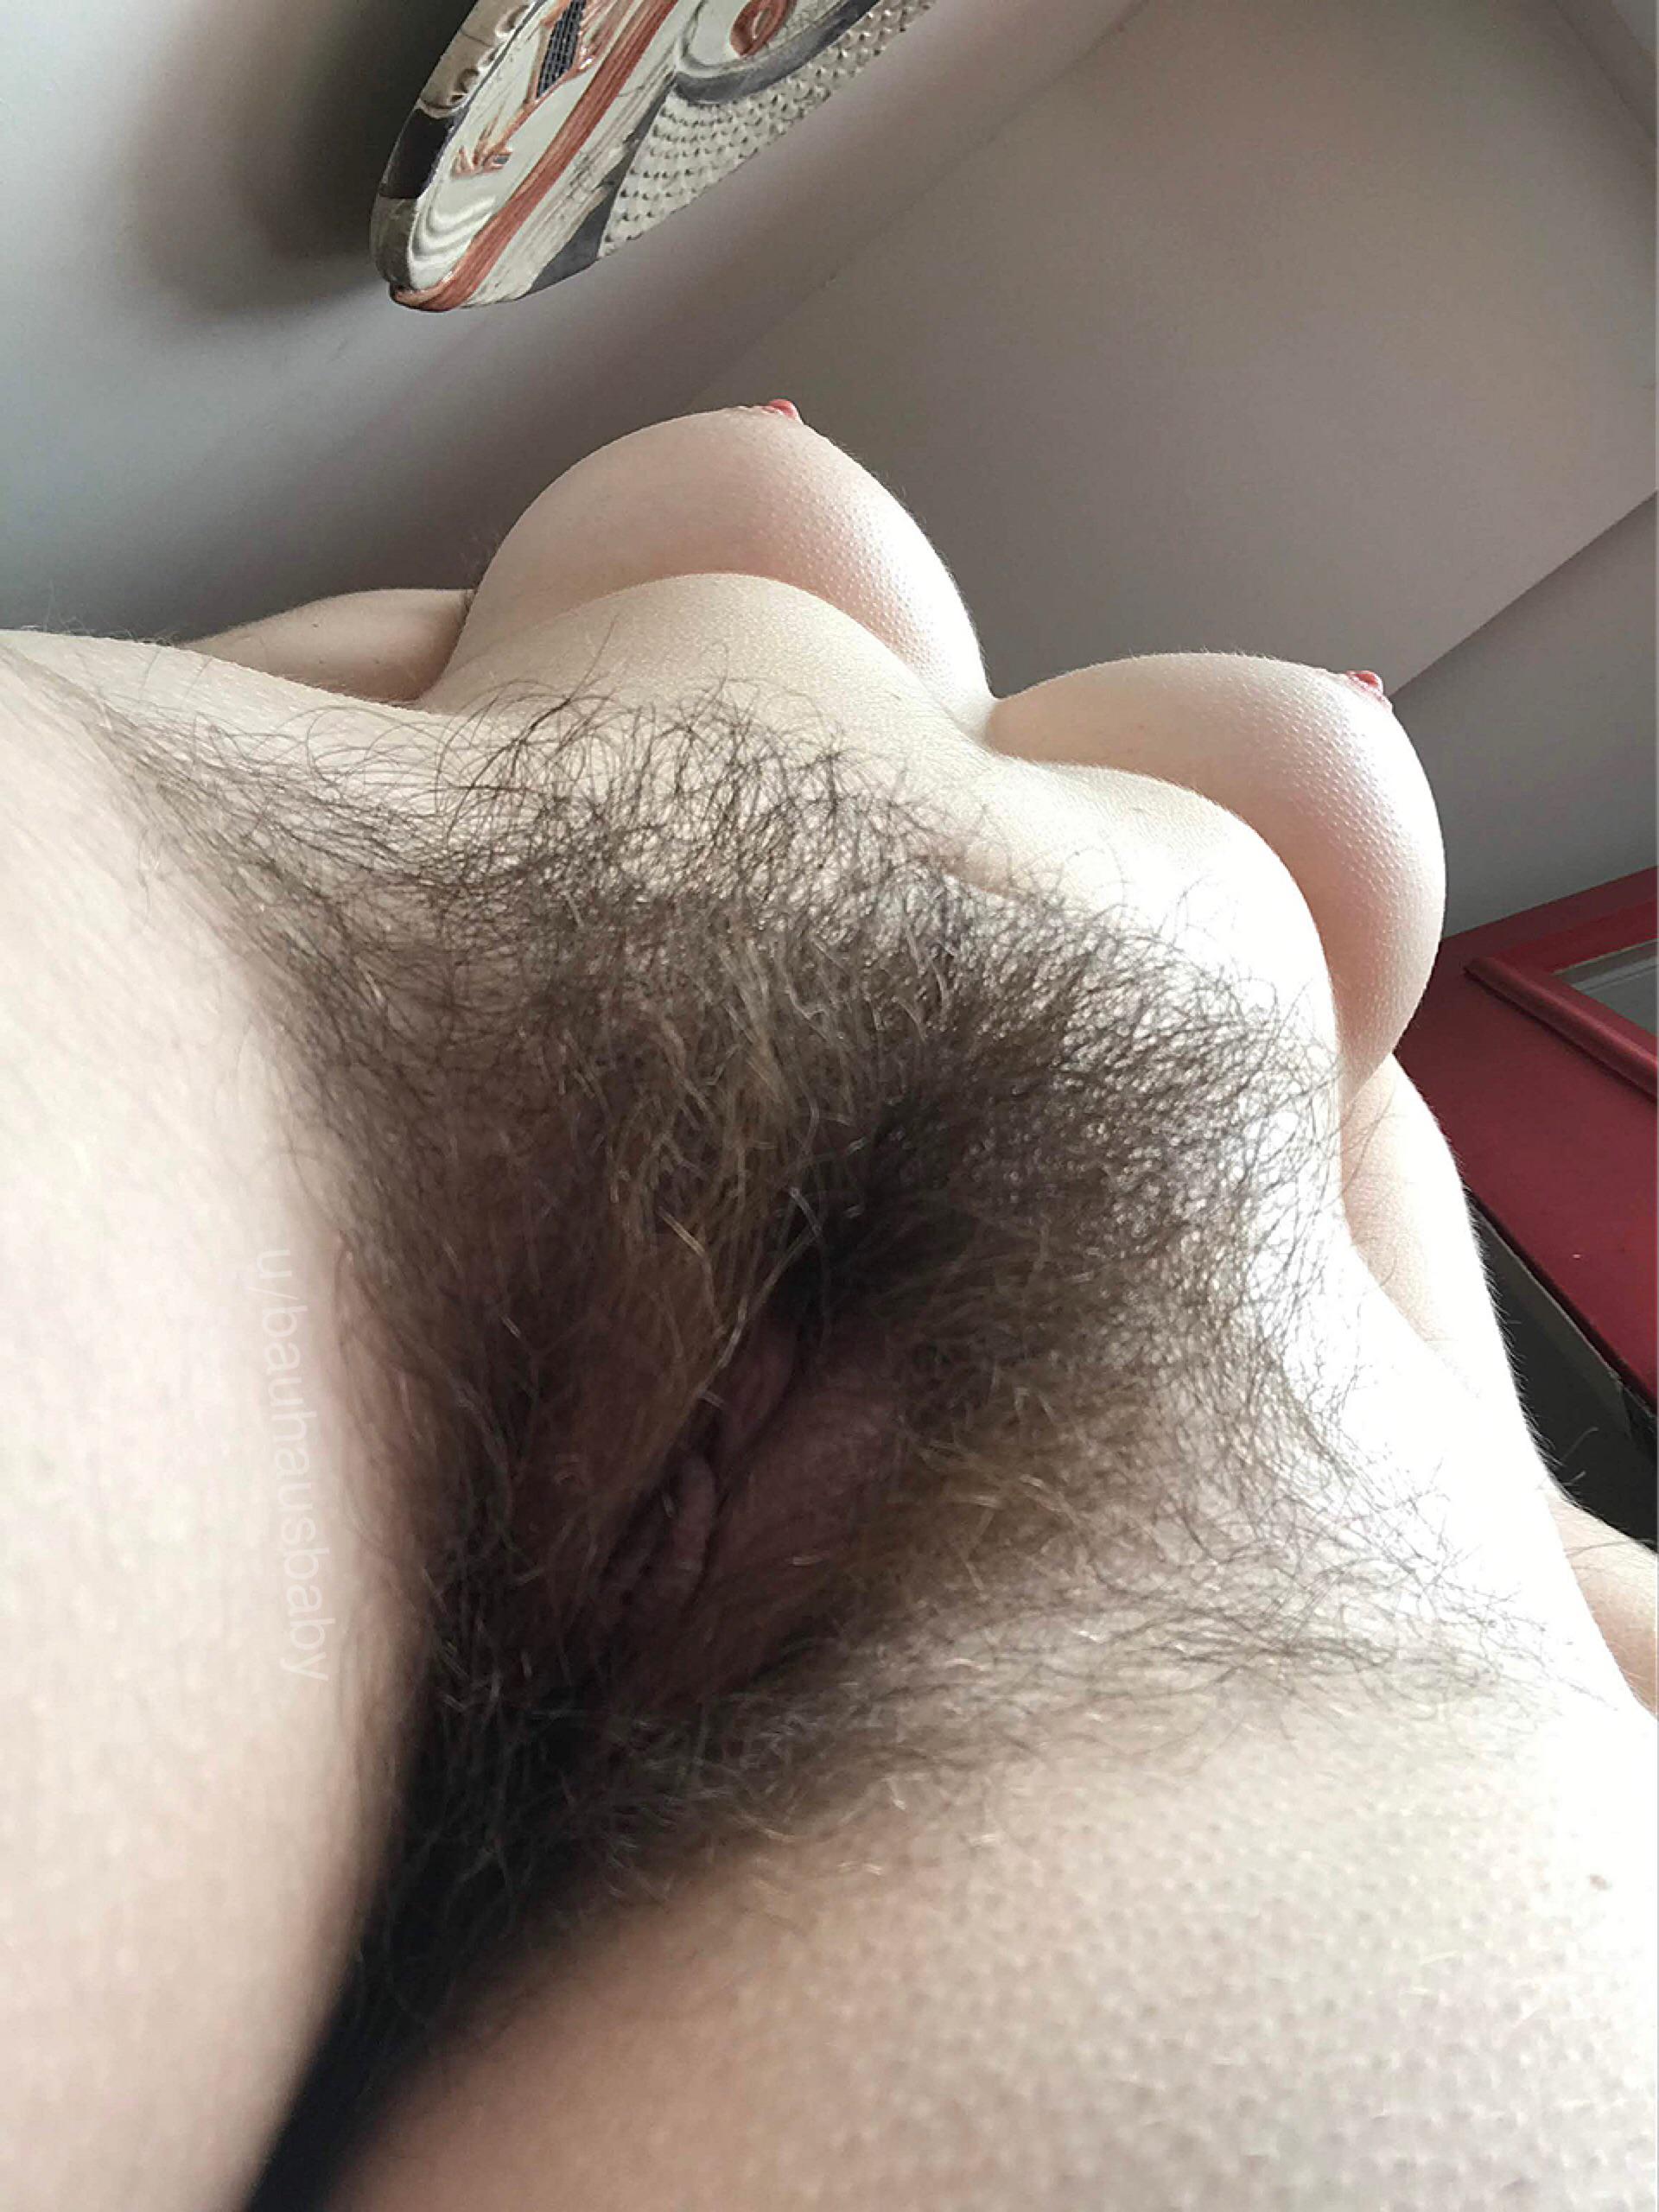 POV standing over you with my hairy little pussy picture